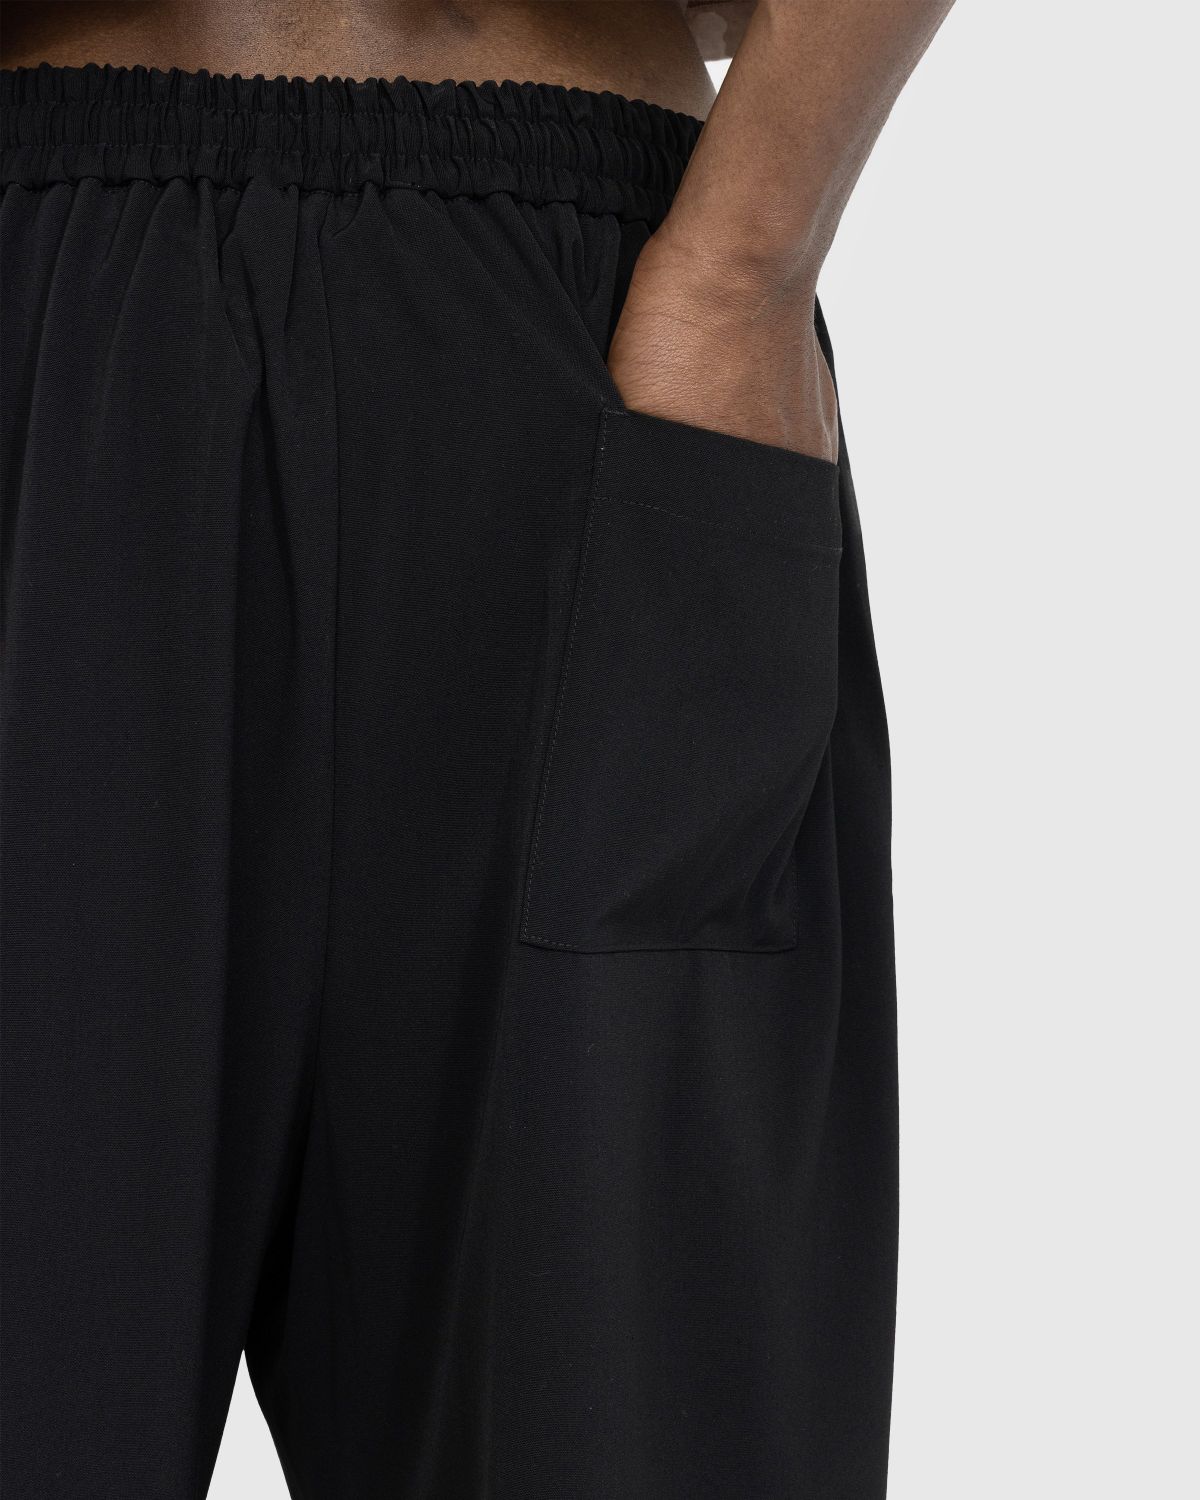 Acne Studios – Relaxed Fit Trousers Black - Pants - Black - Image 4